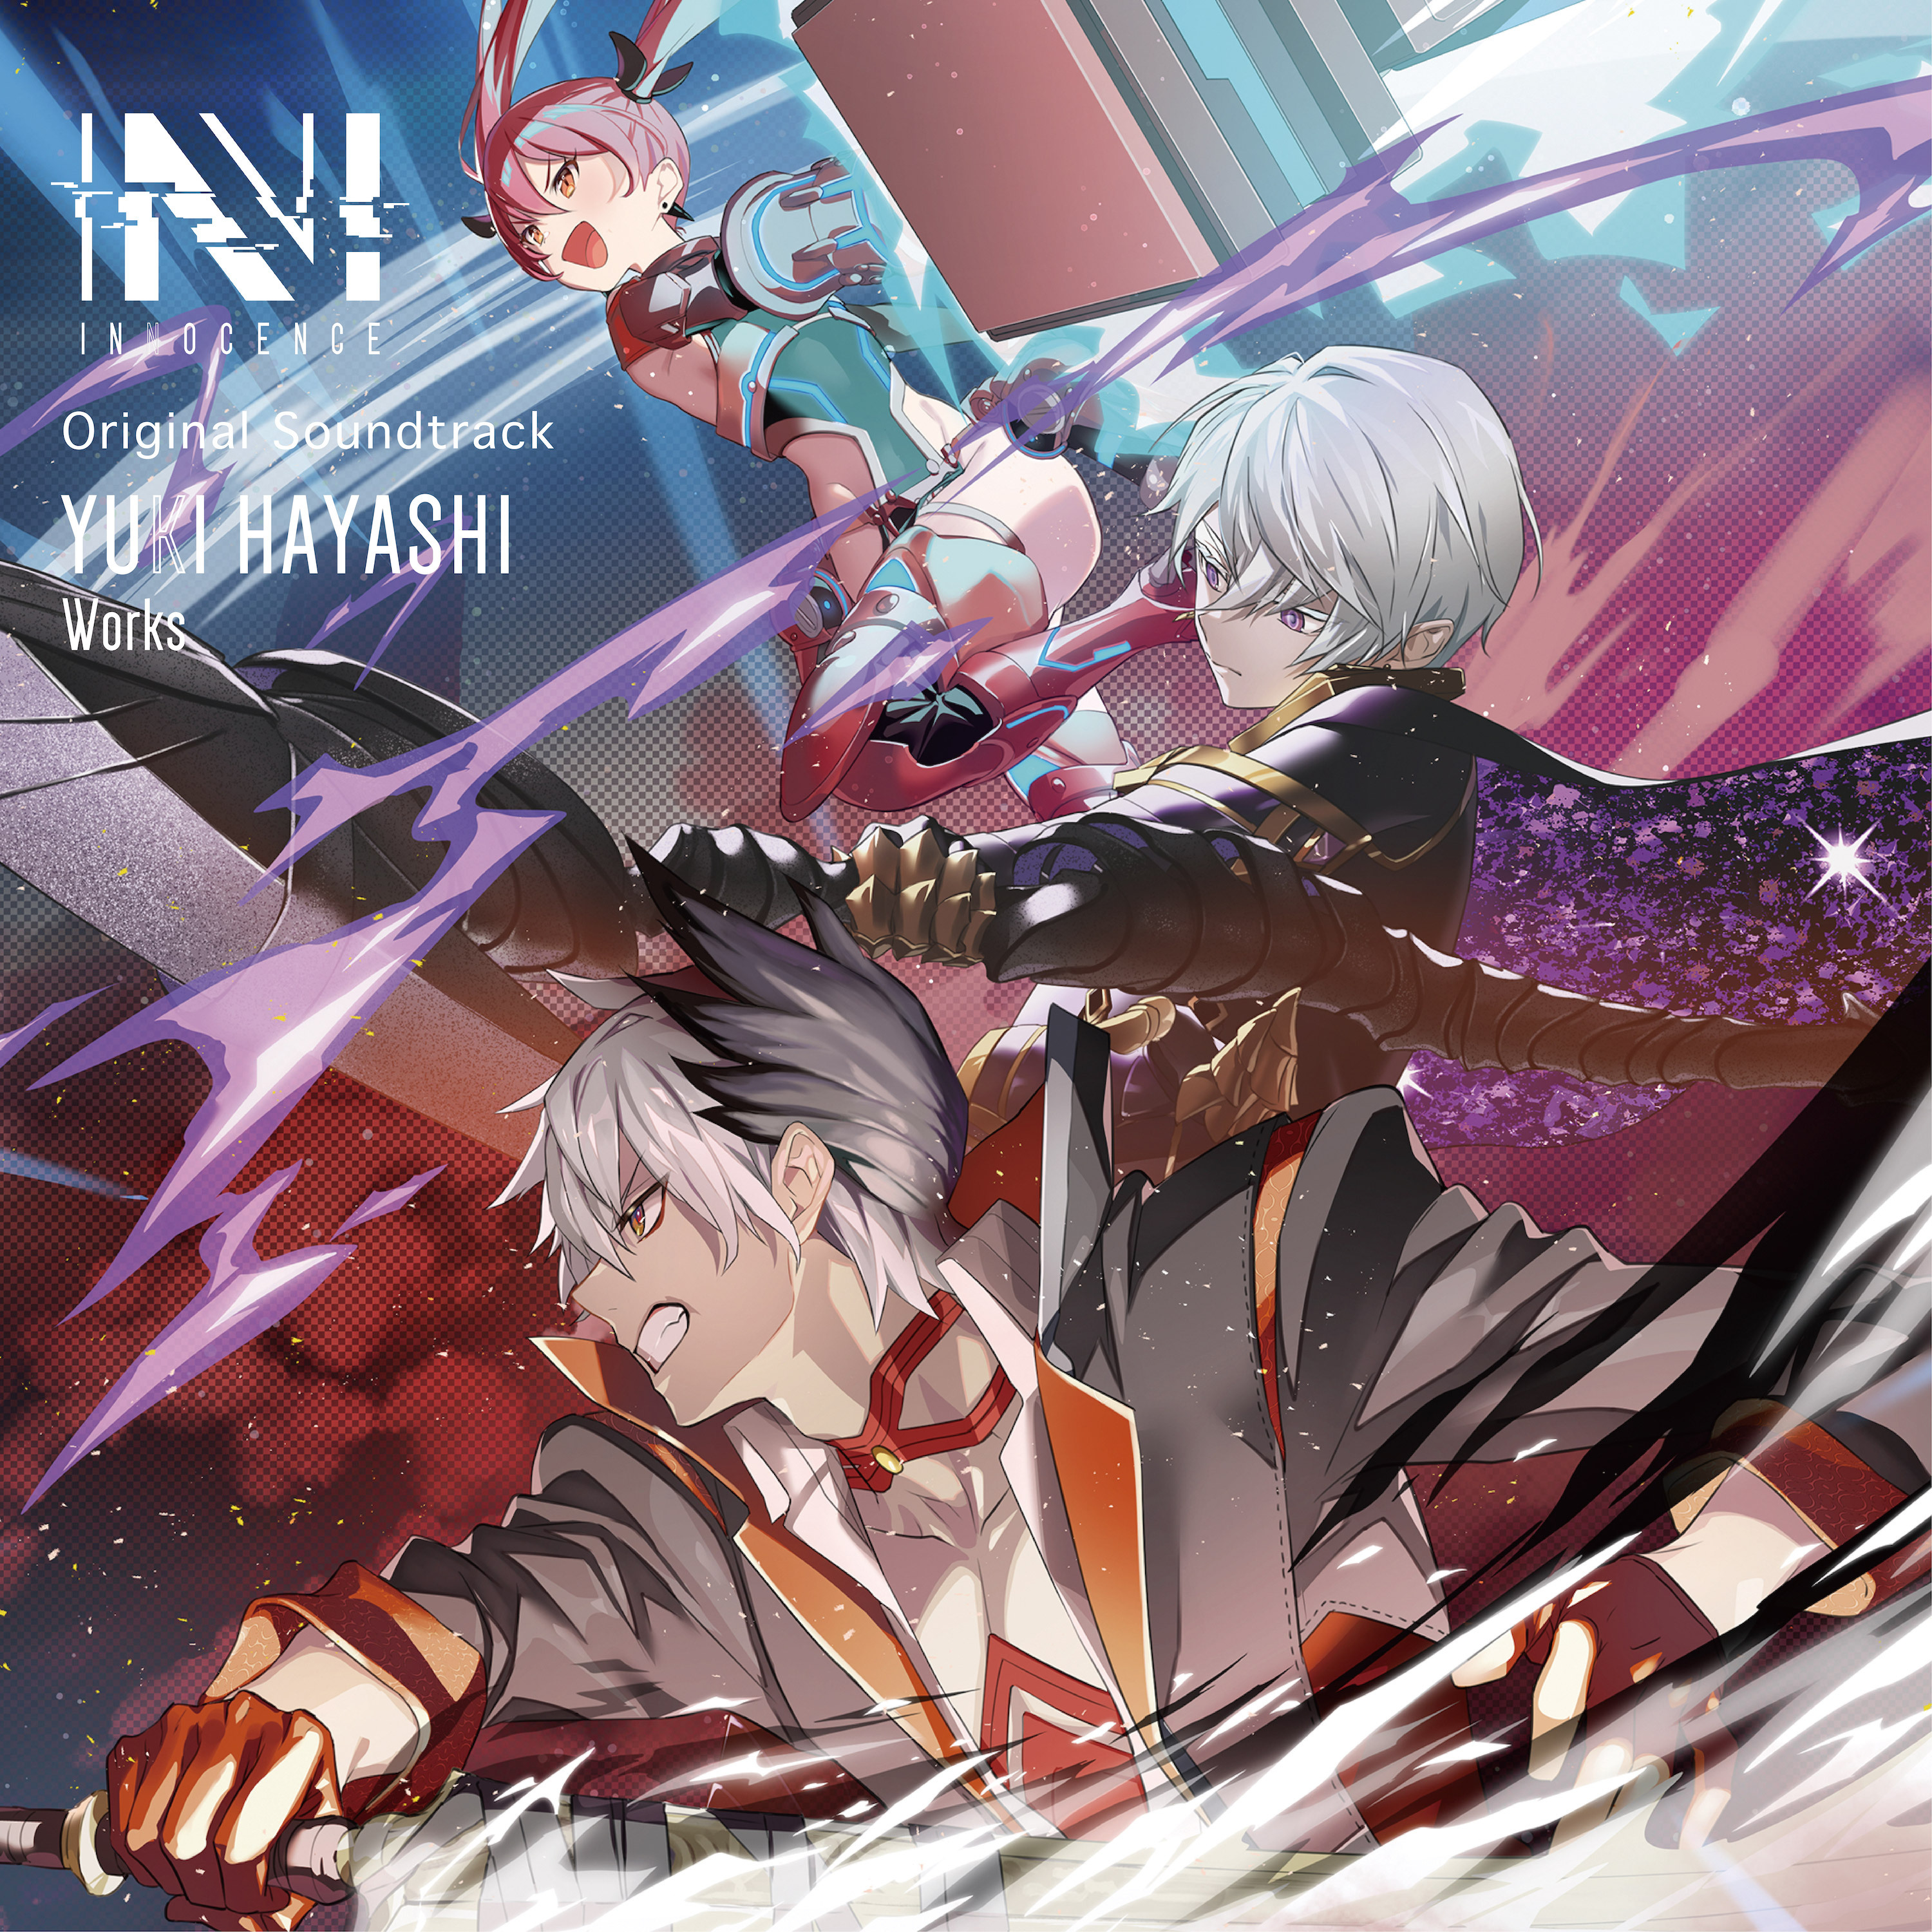 The original soundtrack for the smartphone game app "N-INNOCENCE" is available today!